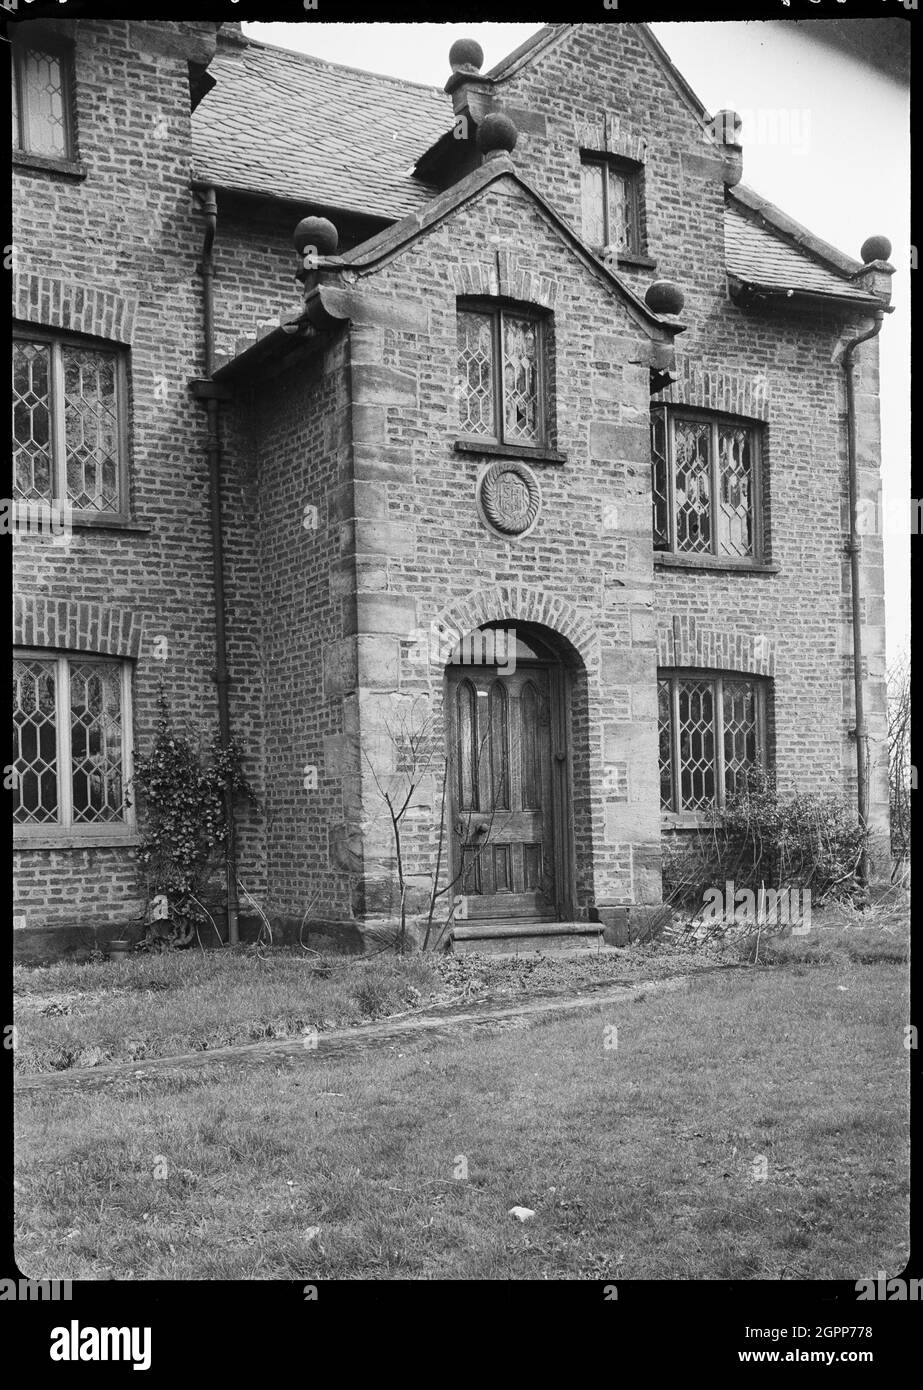 Knobb Hall, Manchester, 1942. An exterior view of Knobb Hall, showing the porch in the front facade. The hall was built in the c17th century, and was demolished post 1942. The front facade has three bays and two storeys, with attics in the two end gables. The porch was two storeys and projecting, with a gabled roof. The gables throughout the hall has ball finials on each corner. Stock Photo